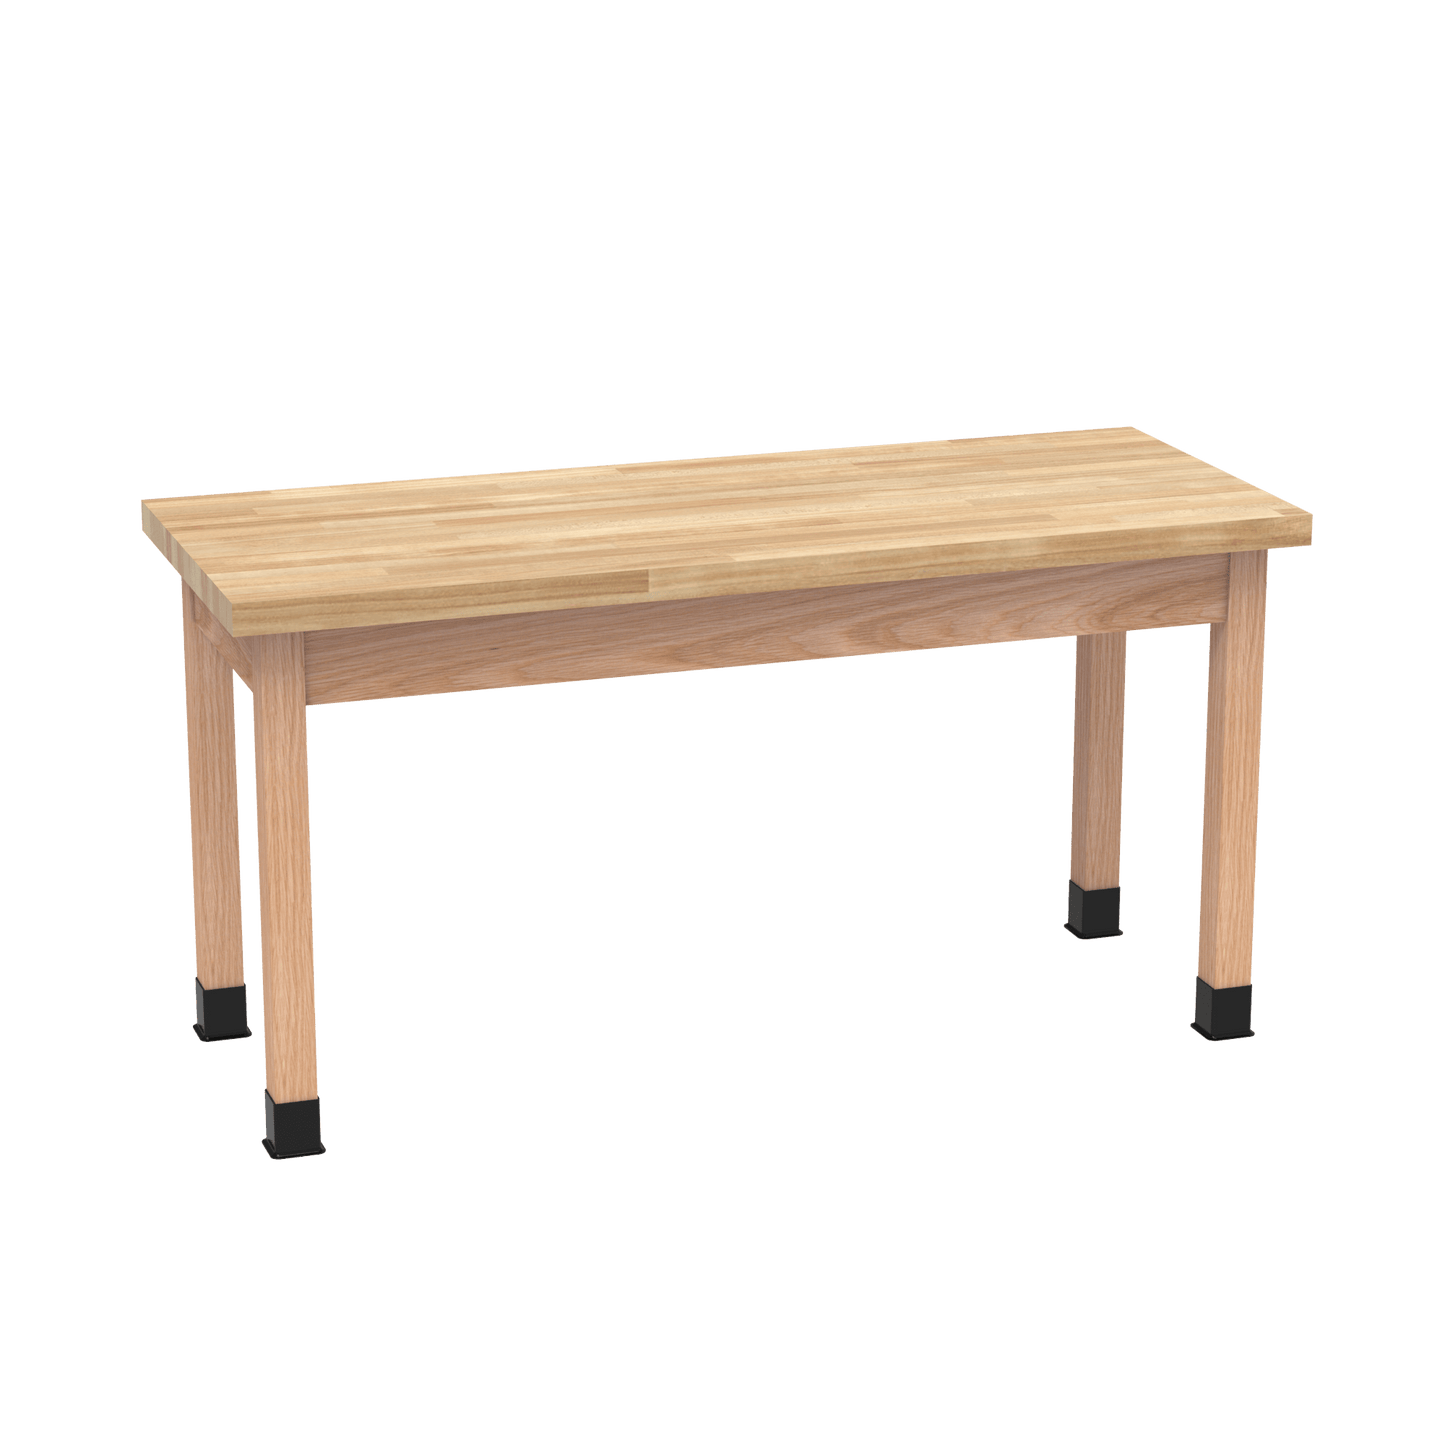 Diversified Woodcrafts Science Table - Plain Apron - 54" W x 42" D - Solid Wood Frame and Adjustable Glides - SchoolOutlet